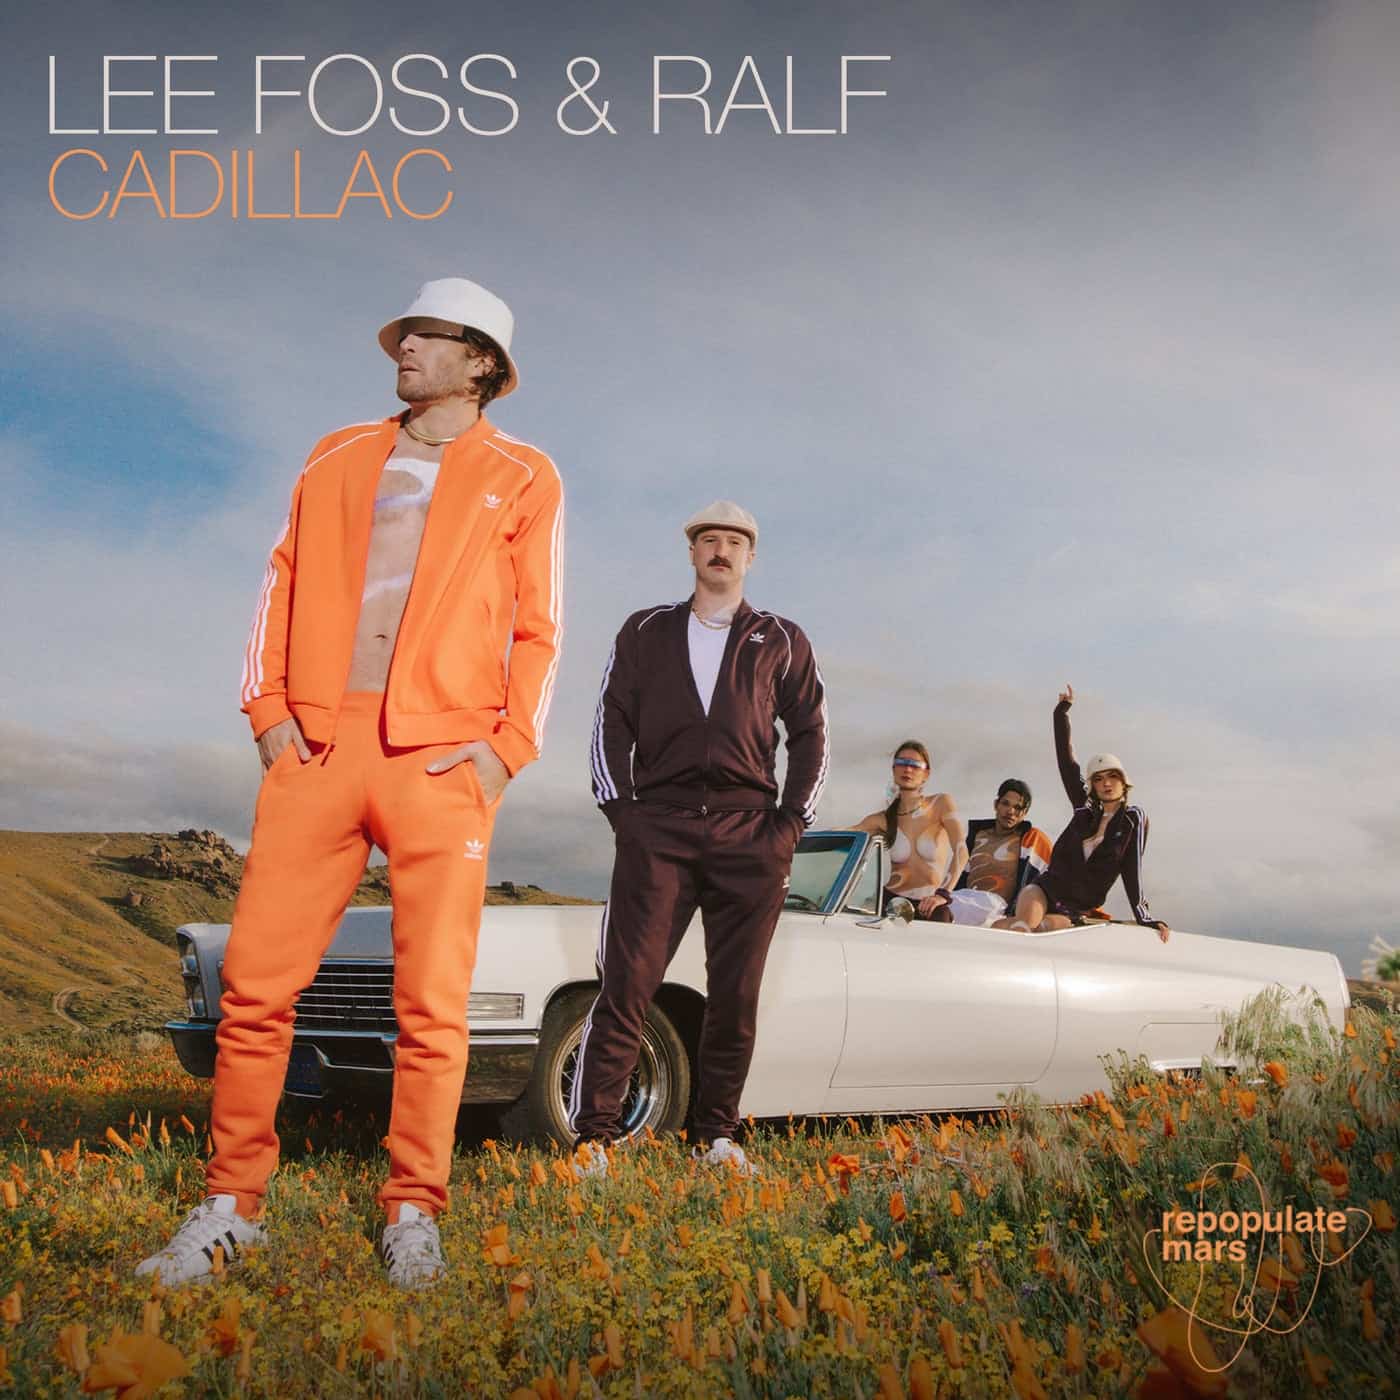 image cover: Lee Foss, Ralf - Cadillac by Repopulate Mars